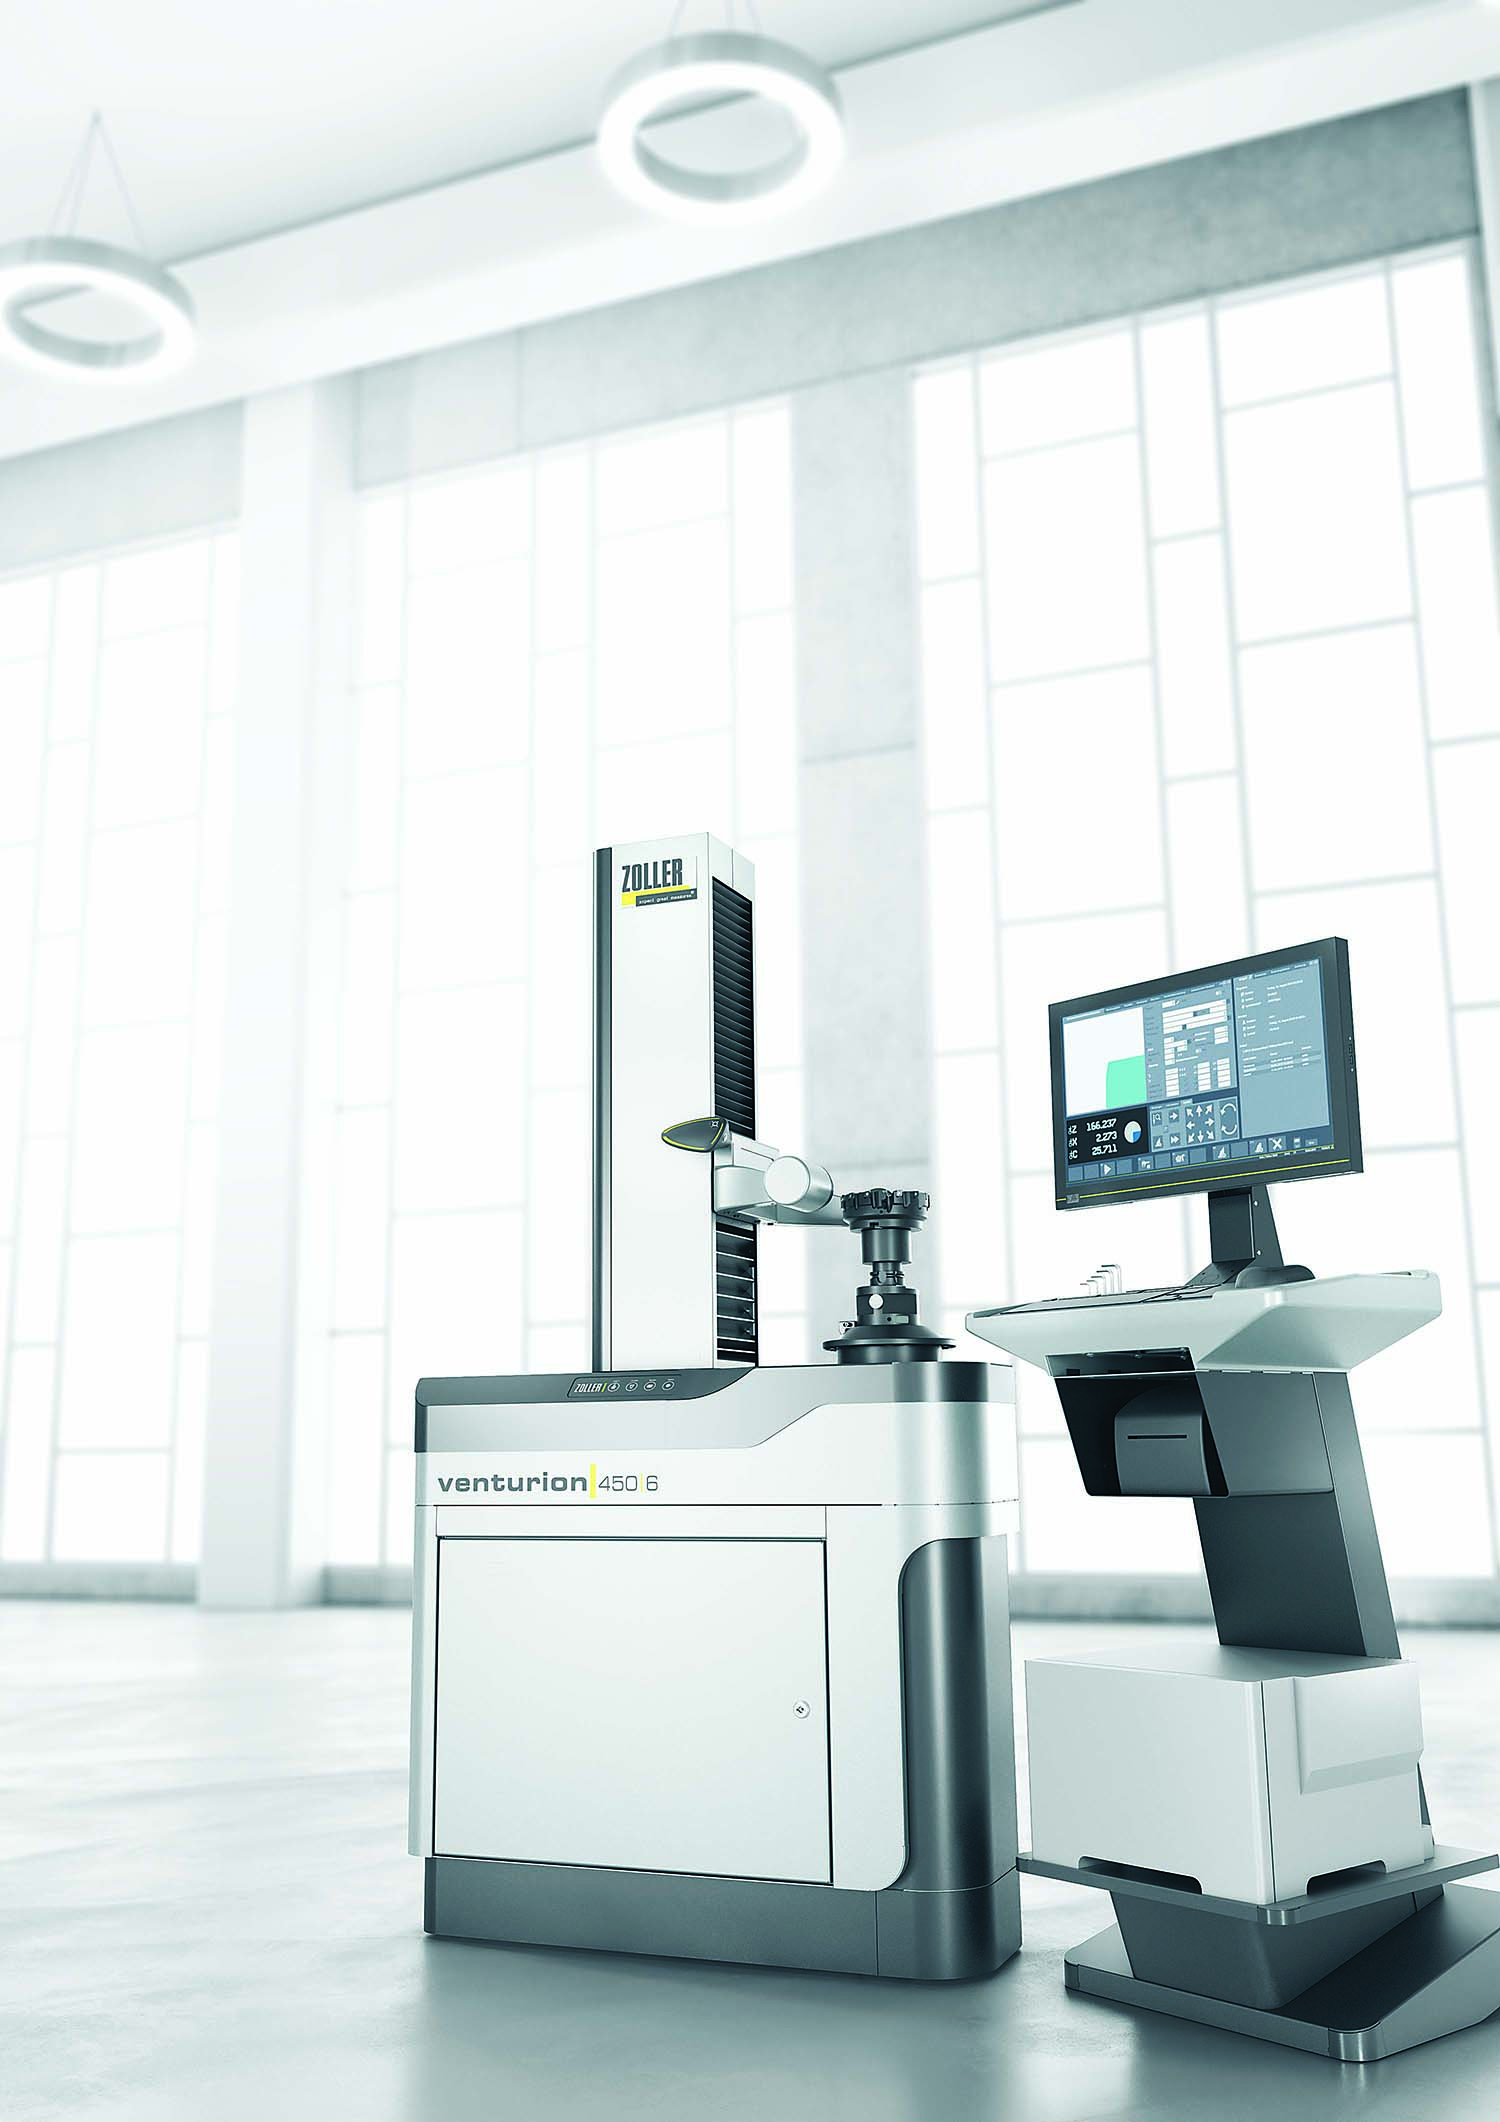 The venturion 450 presetting and measuring machine is billed as a good choice for Industry 4.0 manufacturing systems.